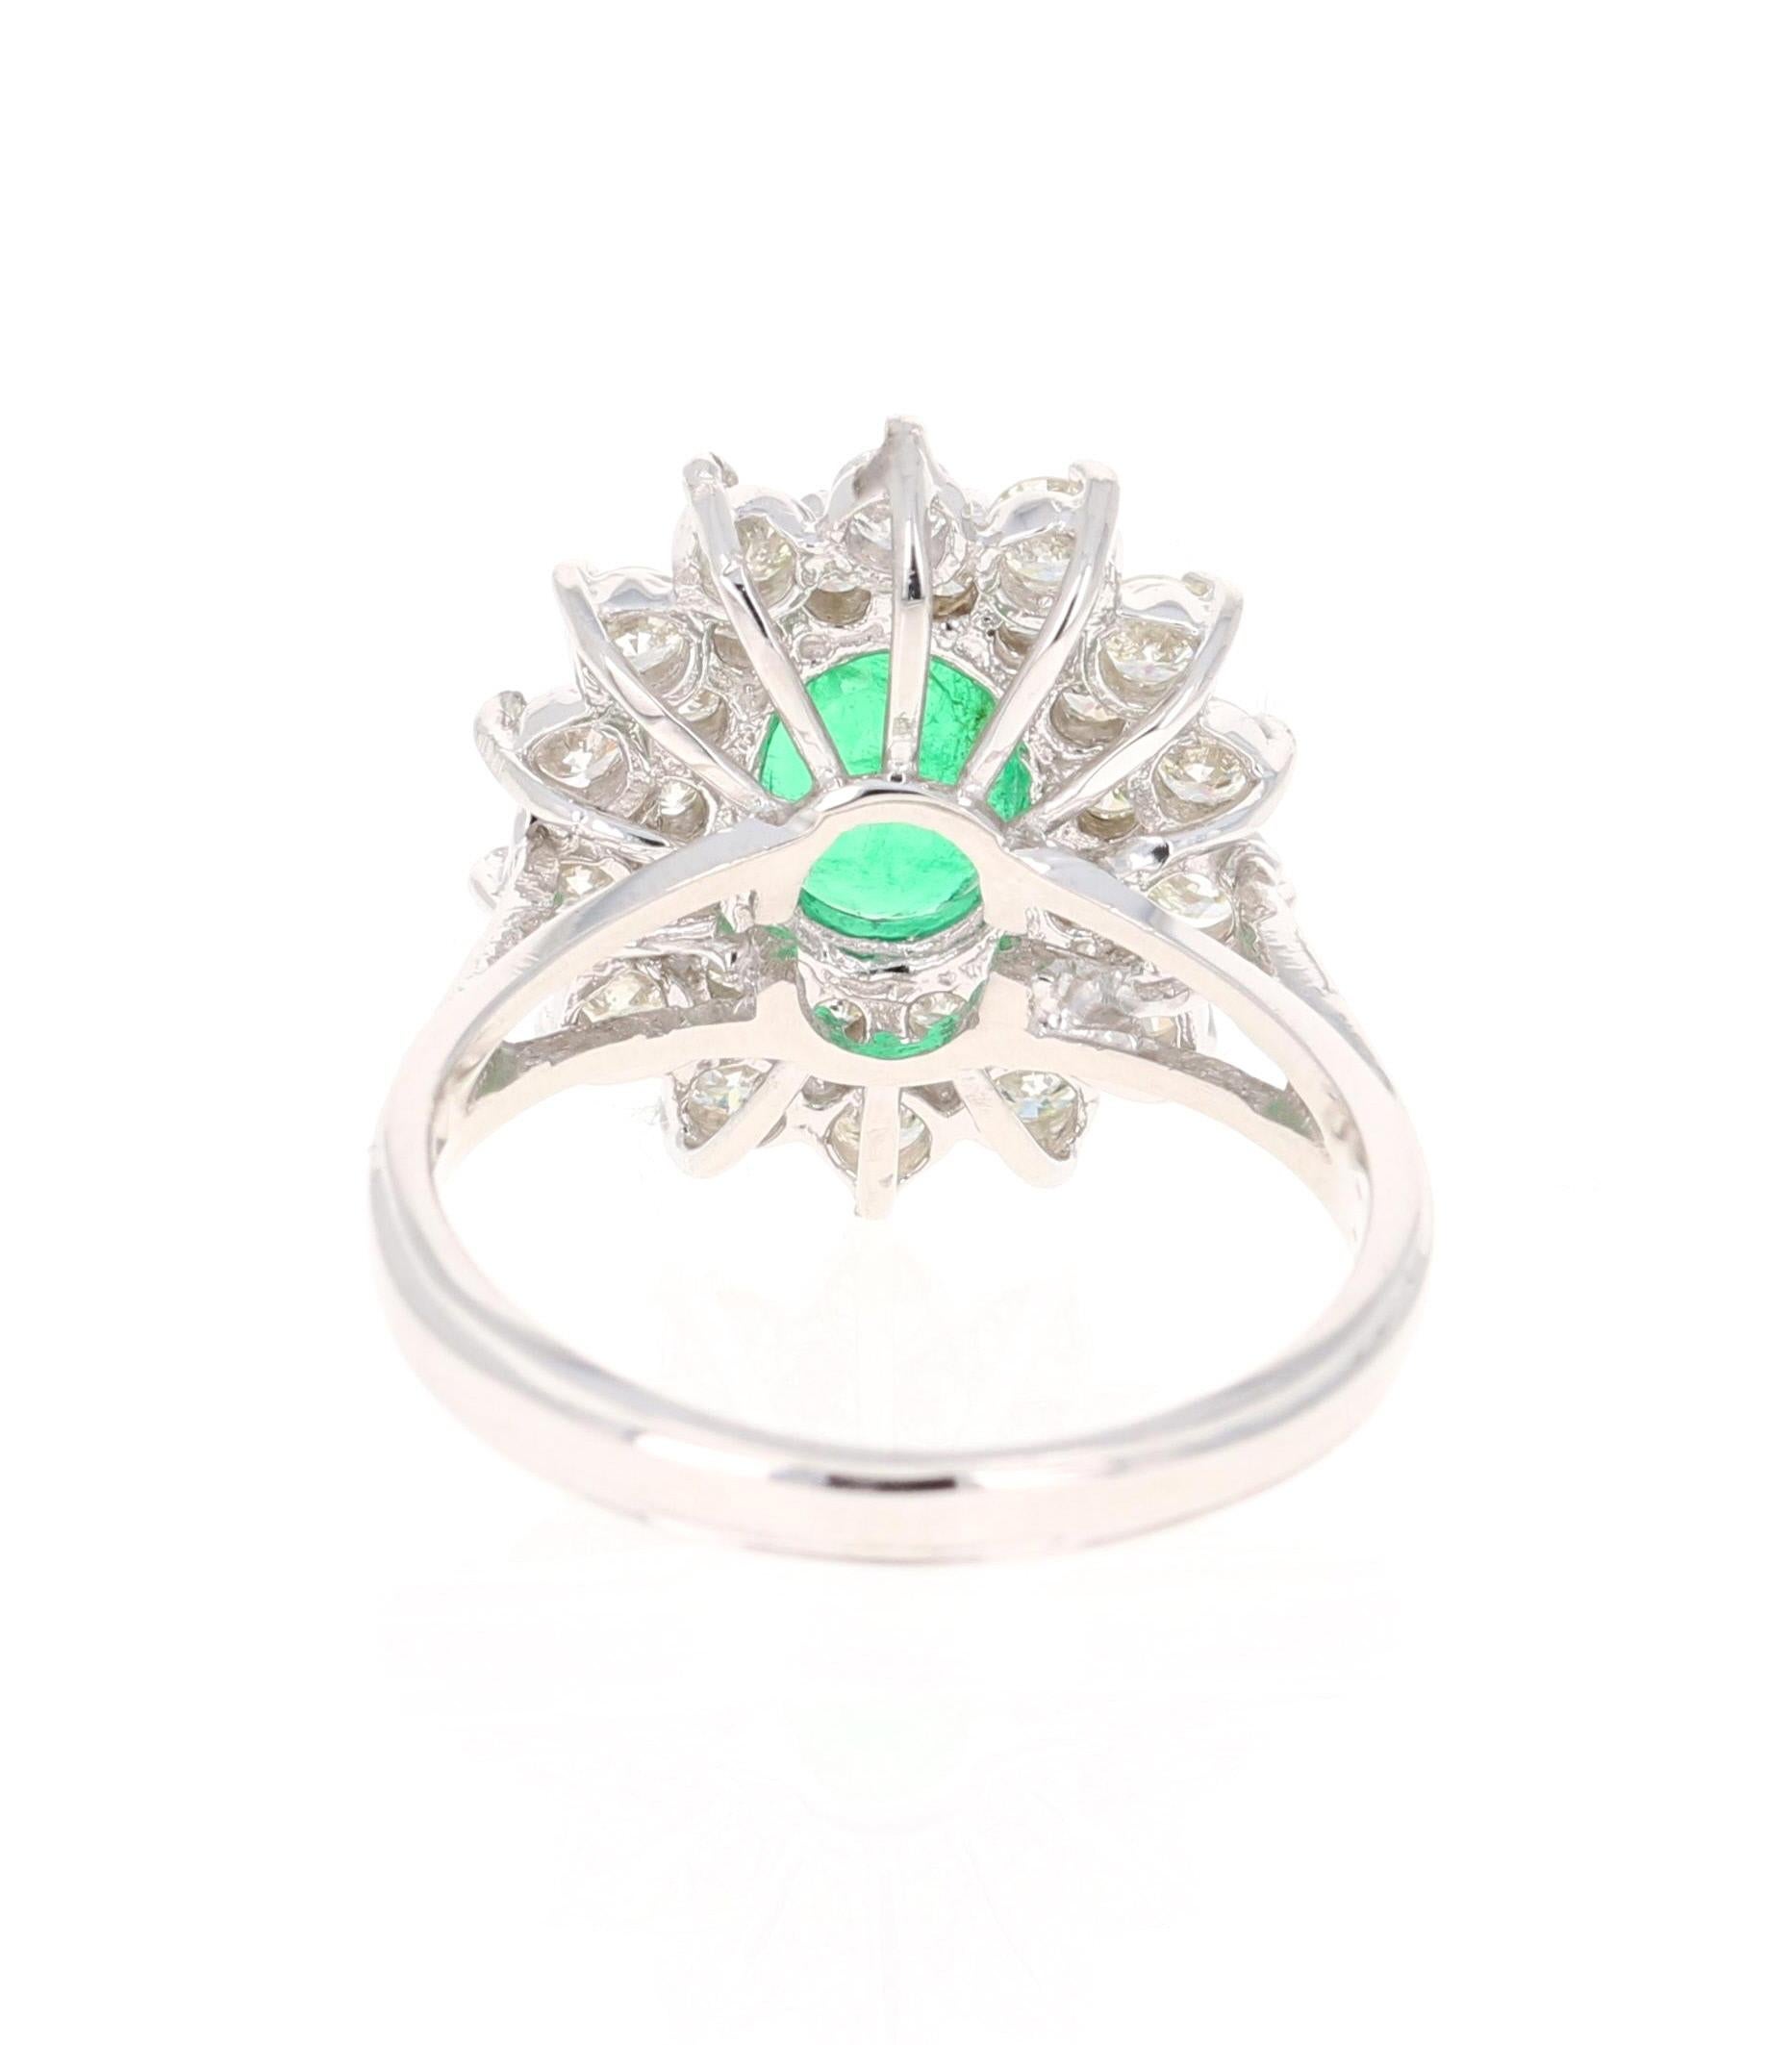 Oval Cut GIA Certified 2.29 Carat Emerald Diamond 18 Karat White Gold Engagement Ring For Sale